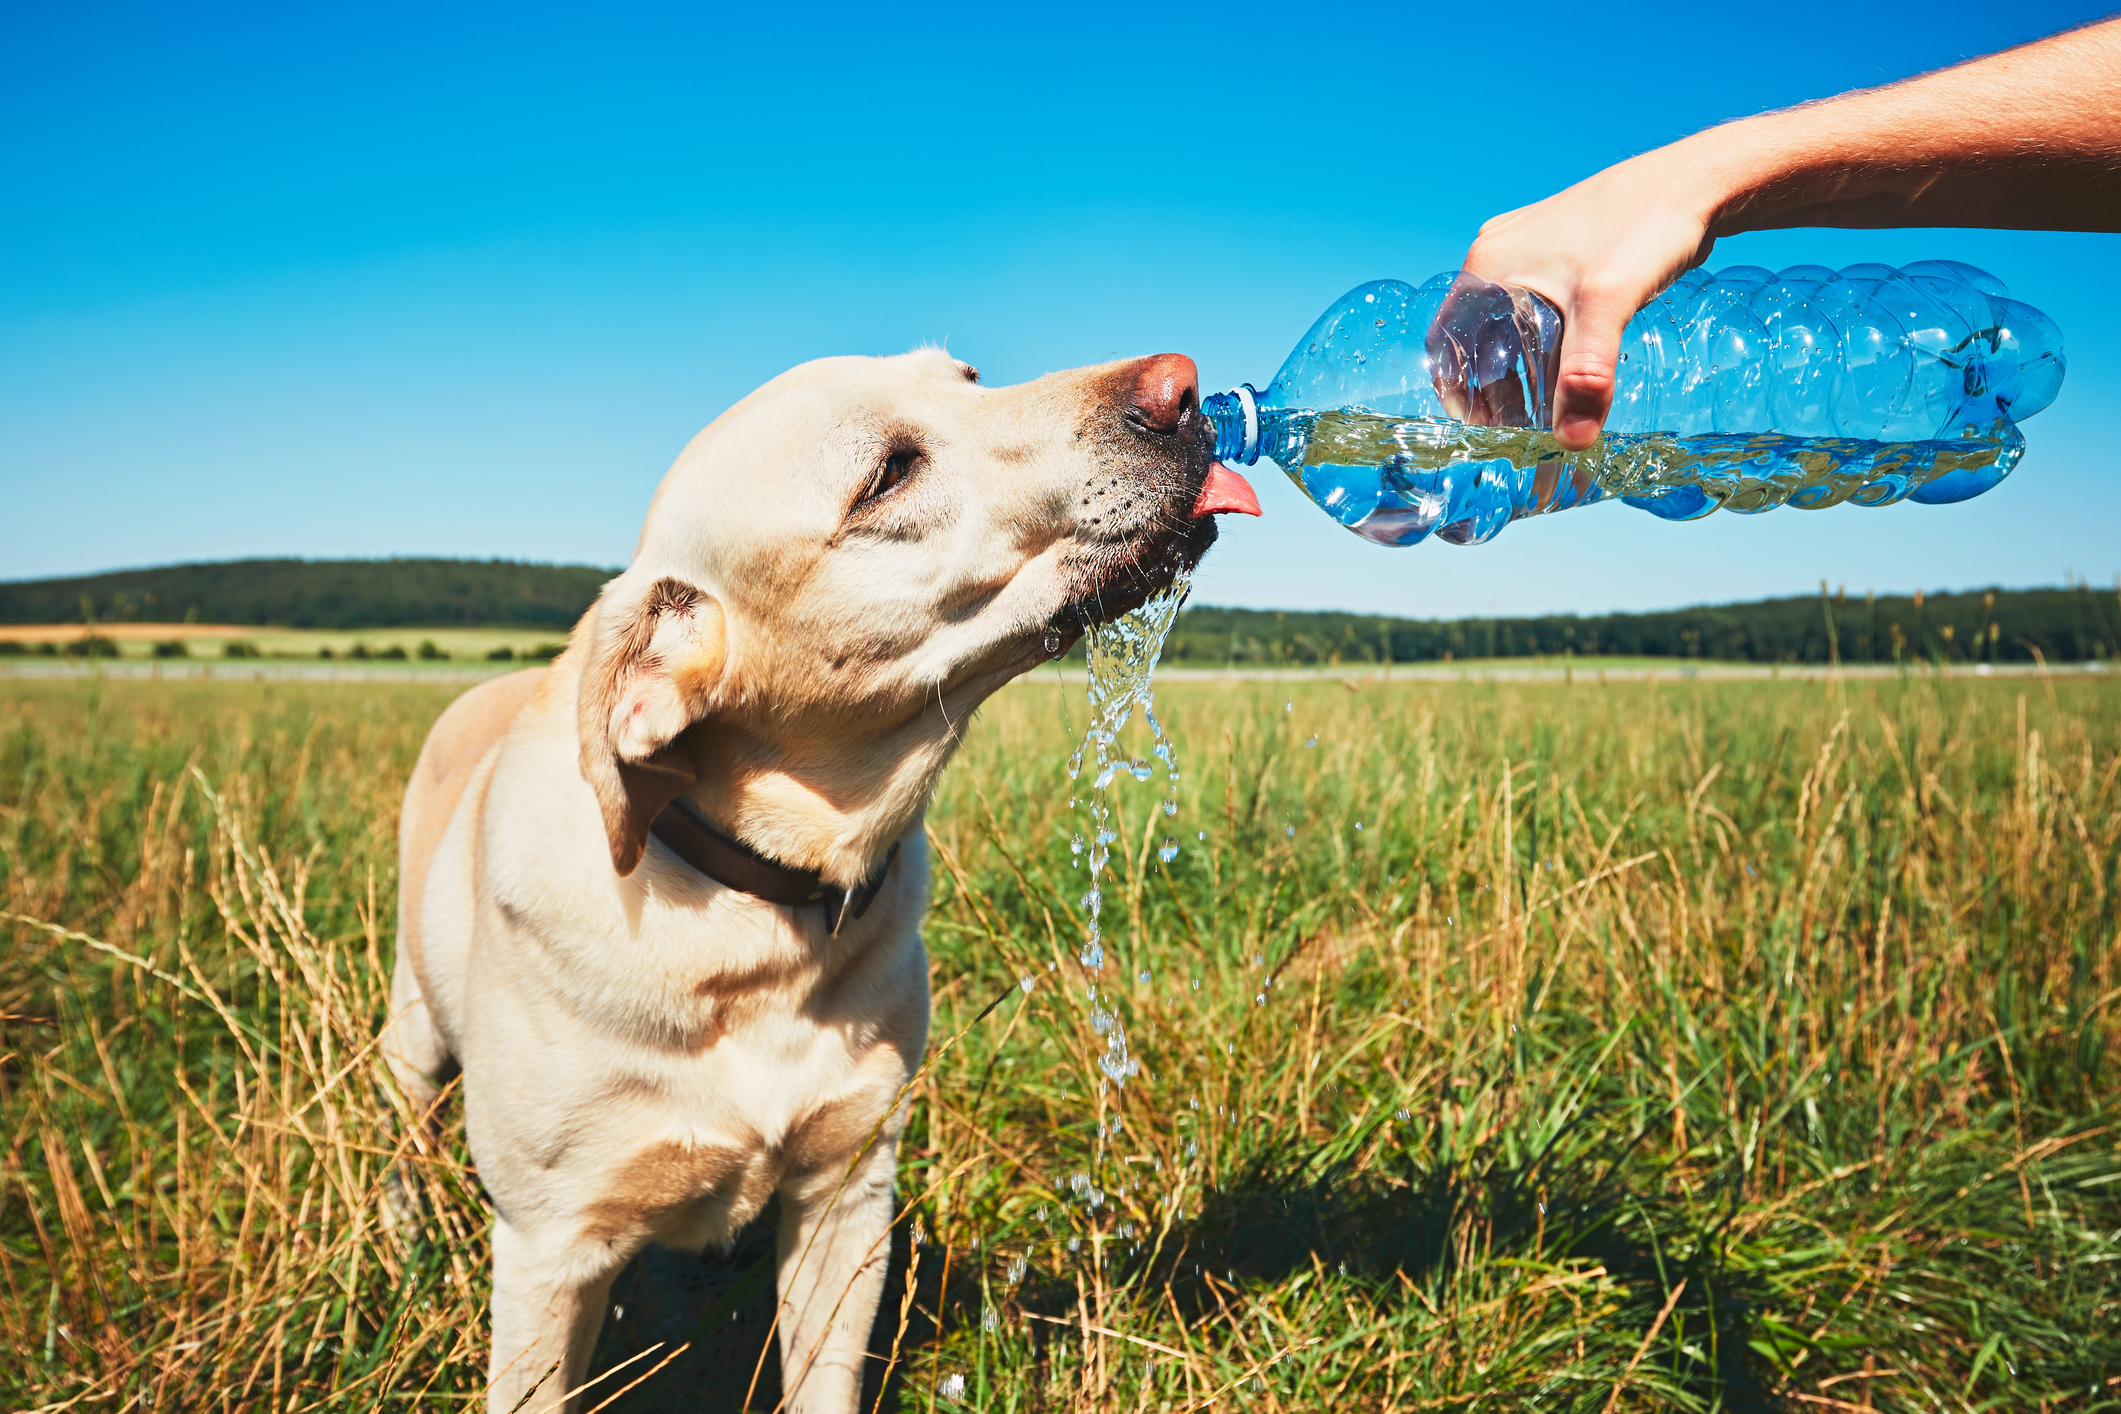 Overheated golden retriever drinks water from a plastic water bottle on a summer day